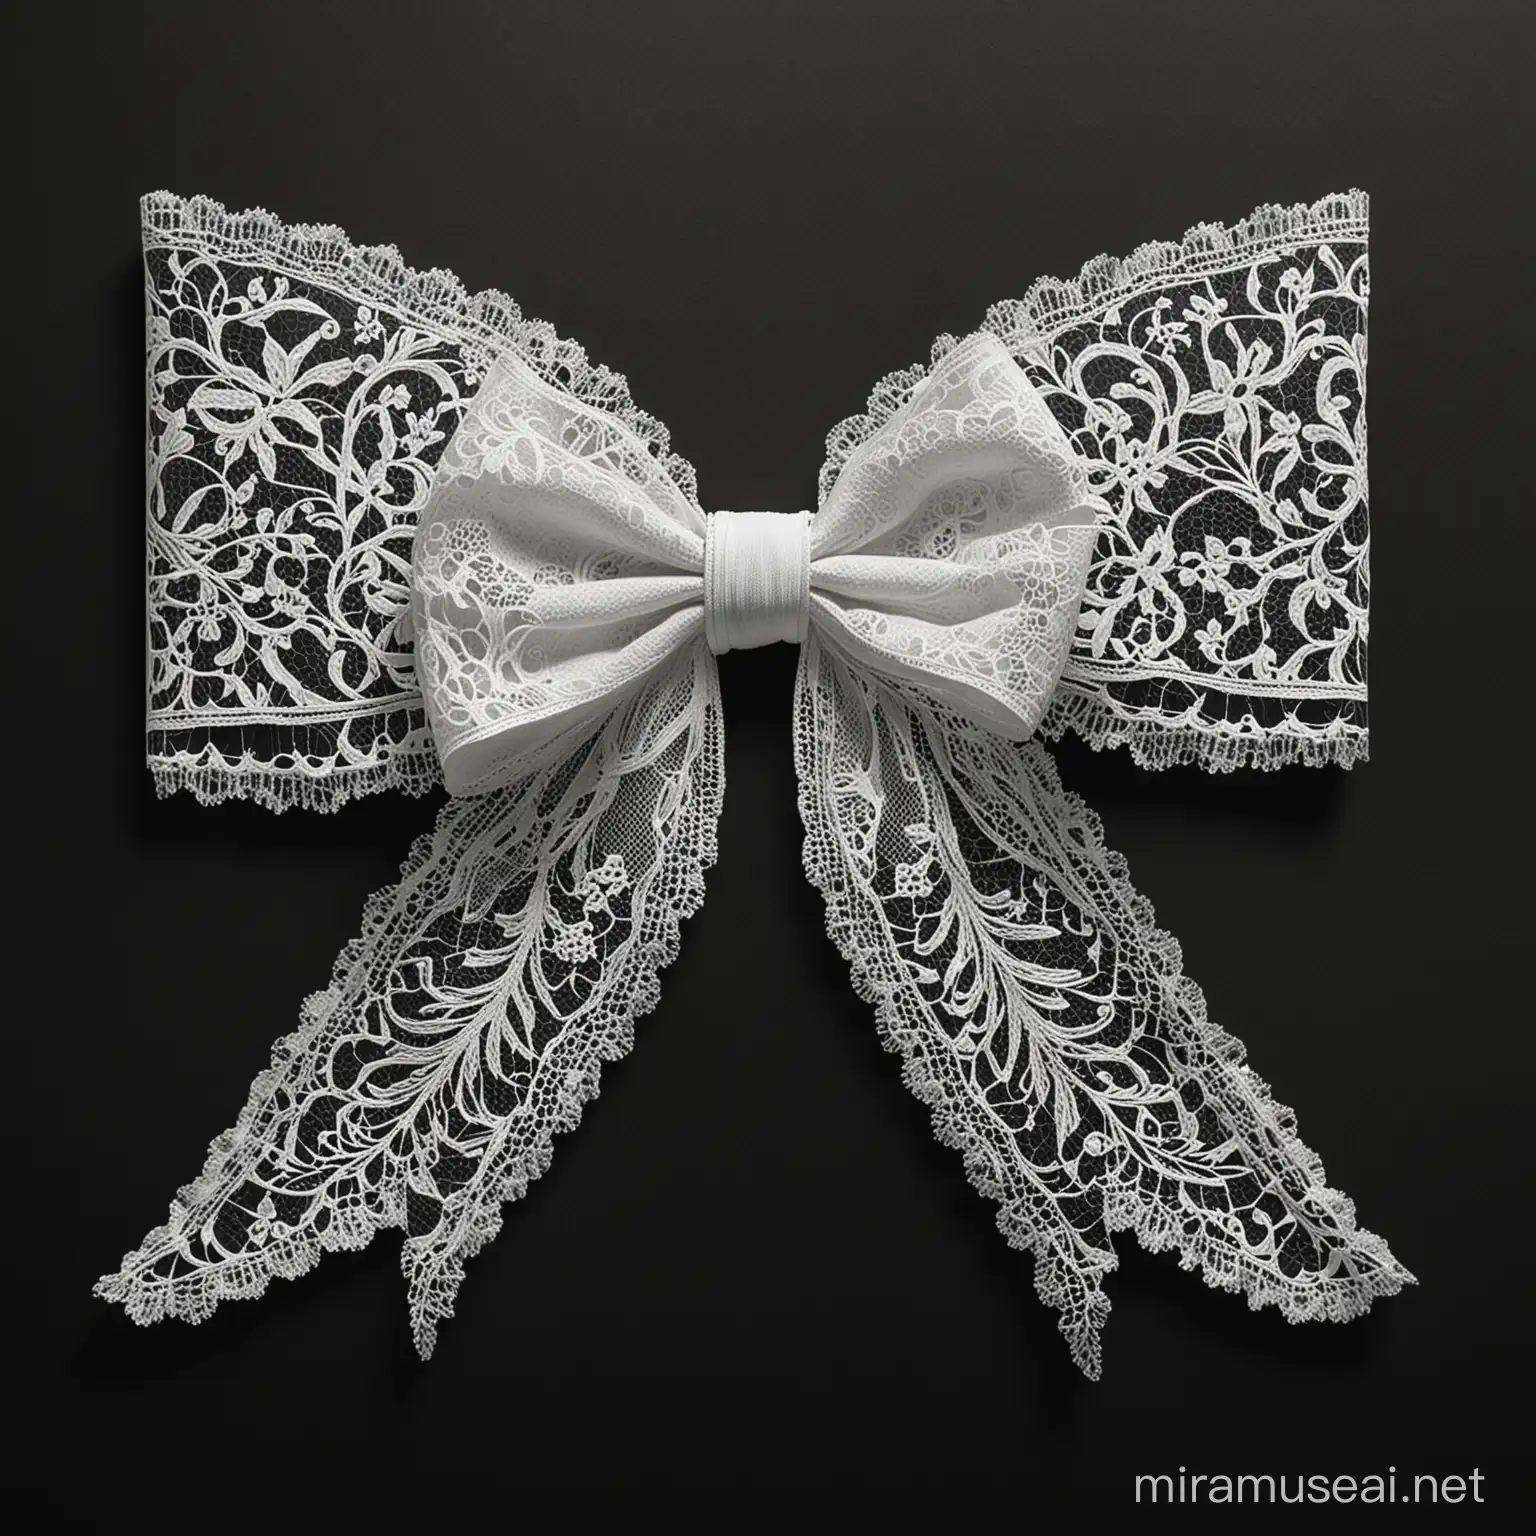 HandPainted White Lace Bow on Black Background